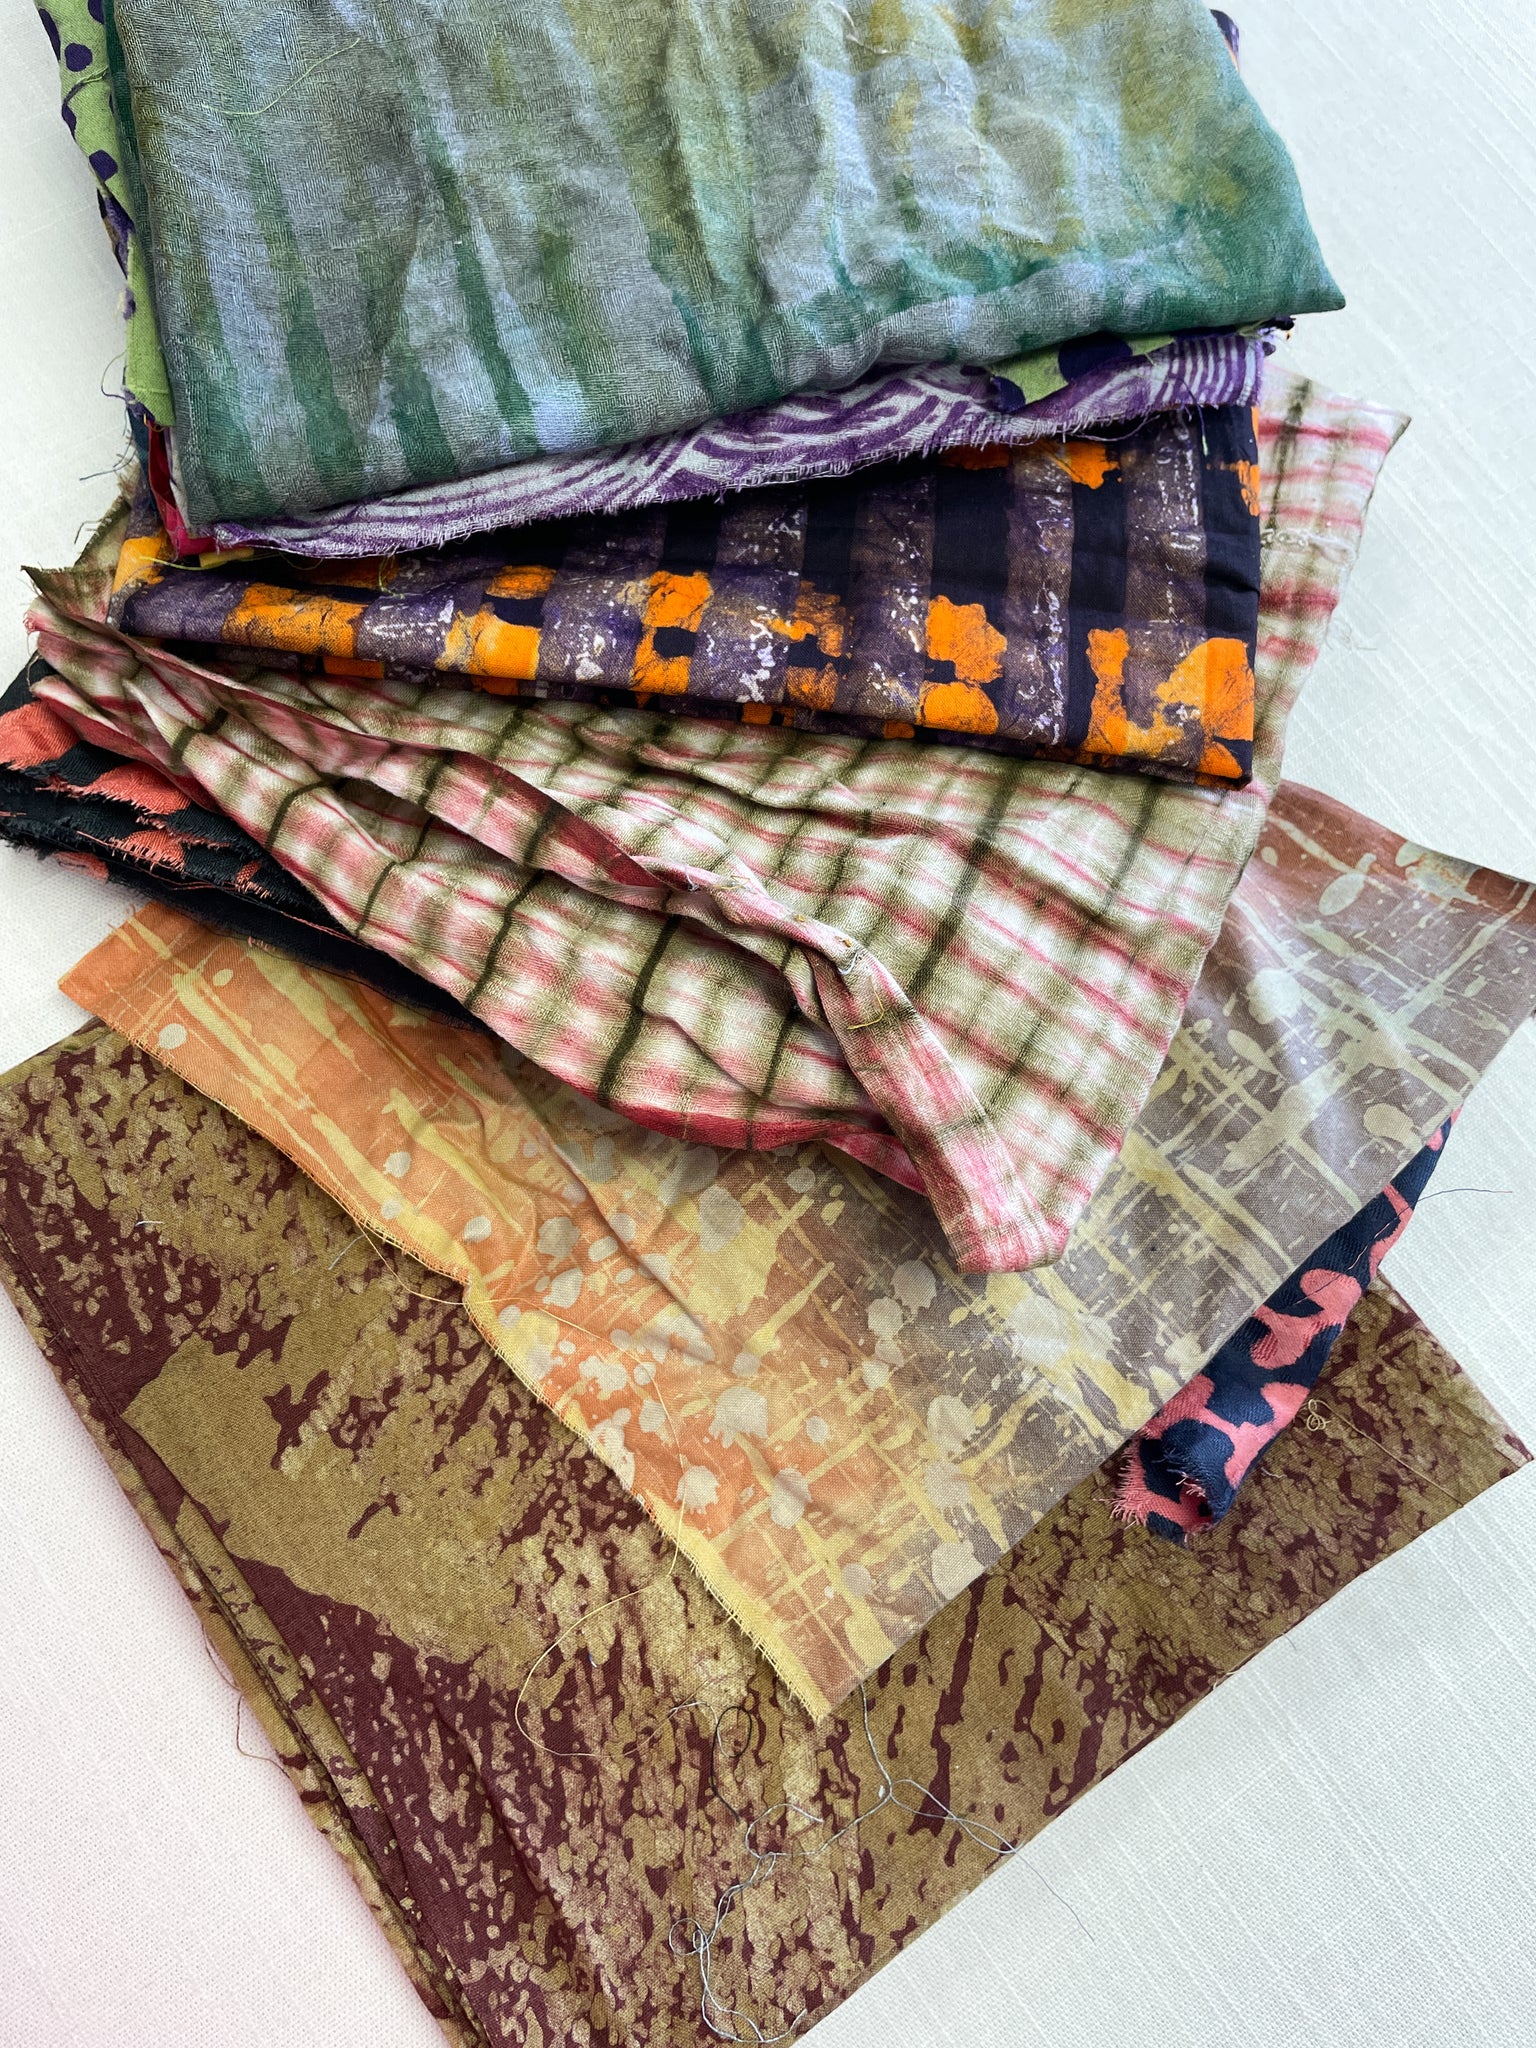 Cotton Mystery Scrap Remnant Bundle - Batiks and Hand-Dyed 1 POUND